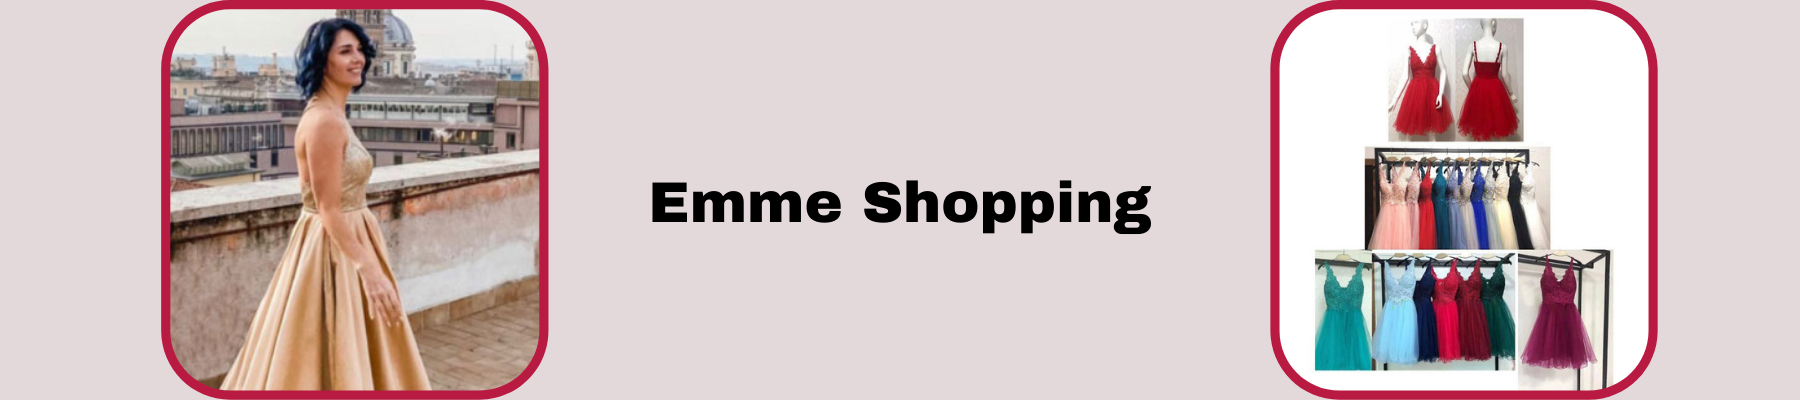 Emme%20Shopping%20(4).png?1636994190141